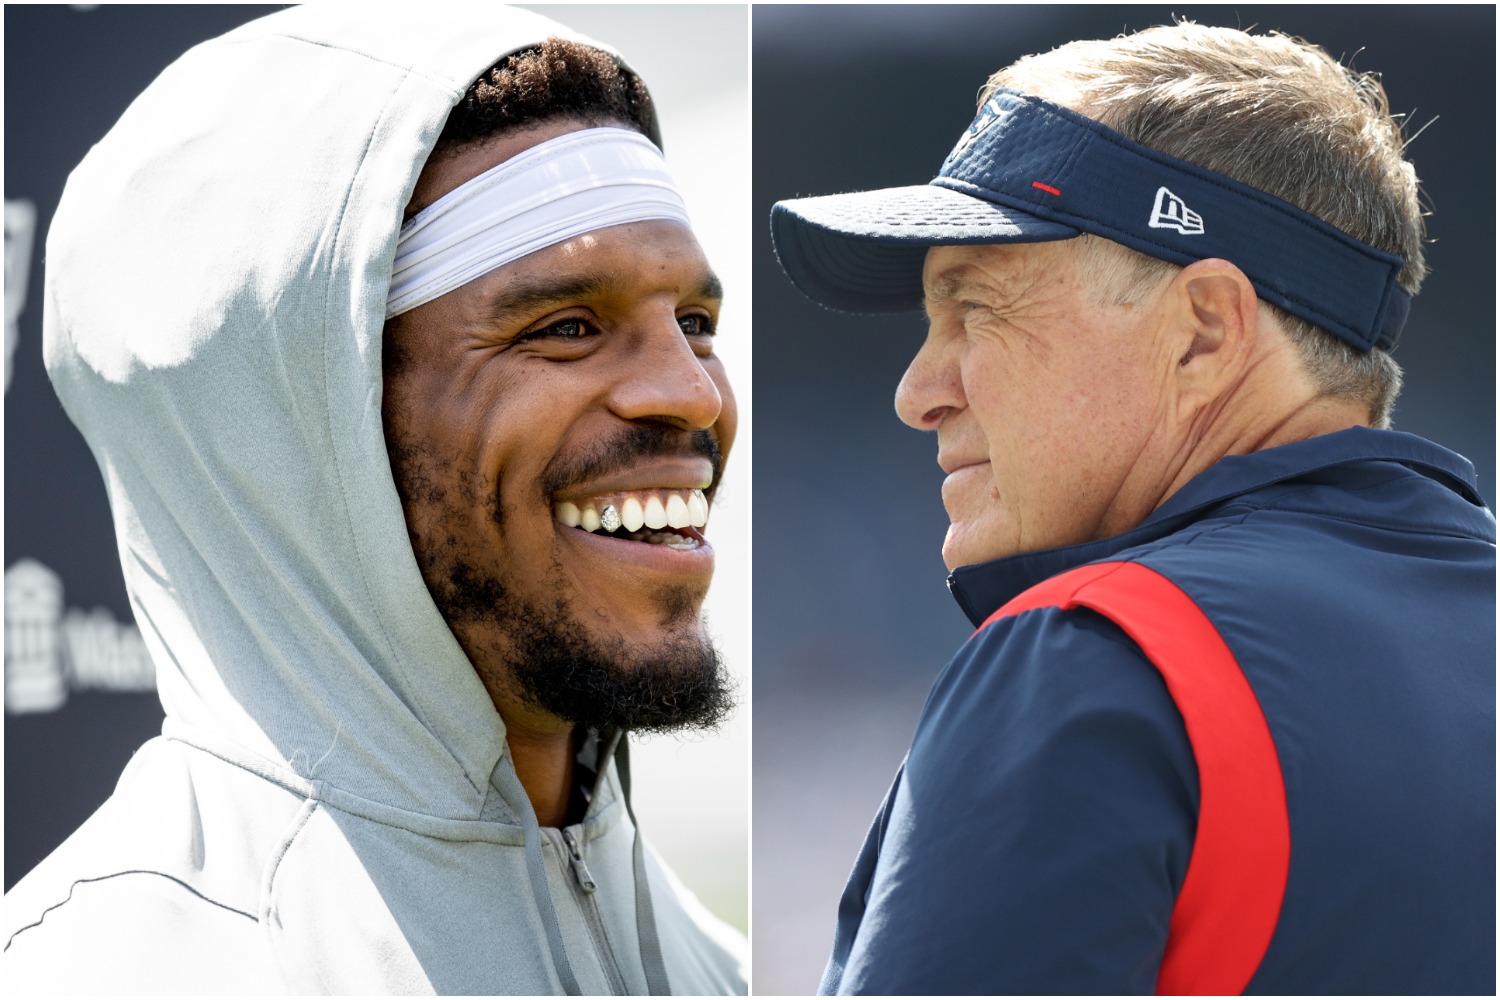 Cam Newton Just Gave Bill Belichick an Unexpected $1.5 Million Parting Gift Without Spending a Single Penny